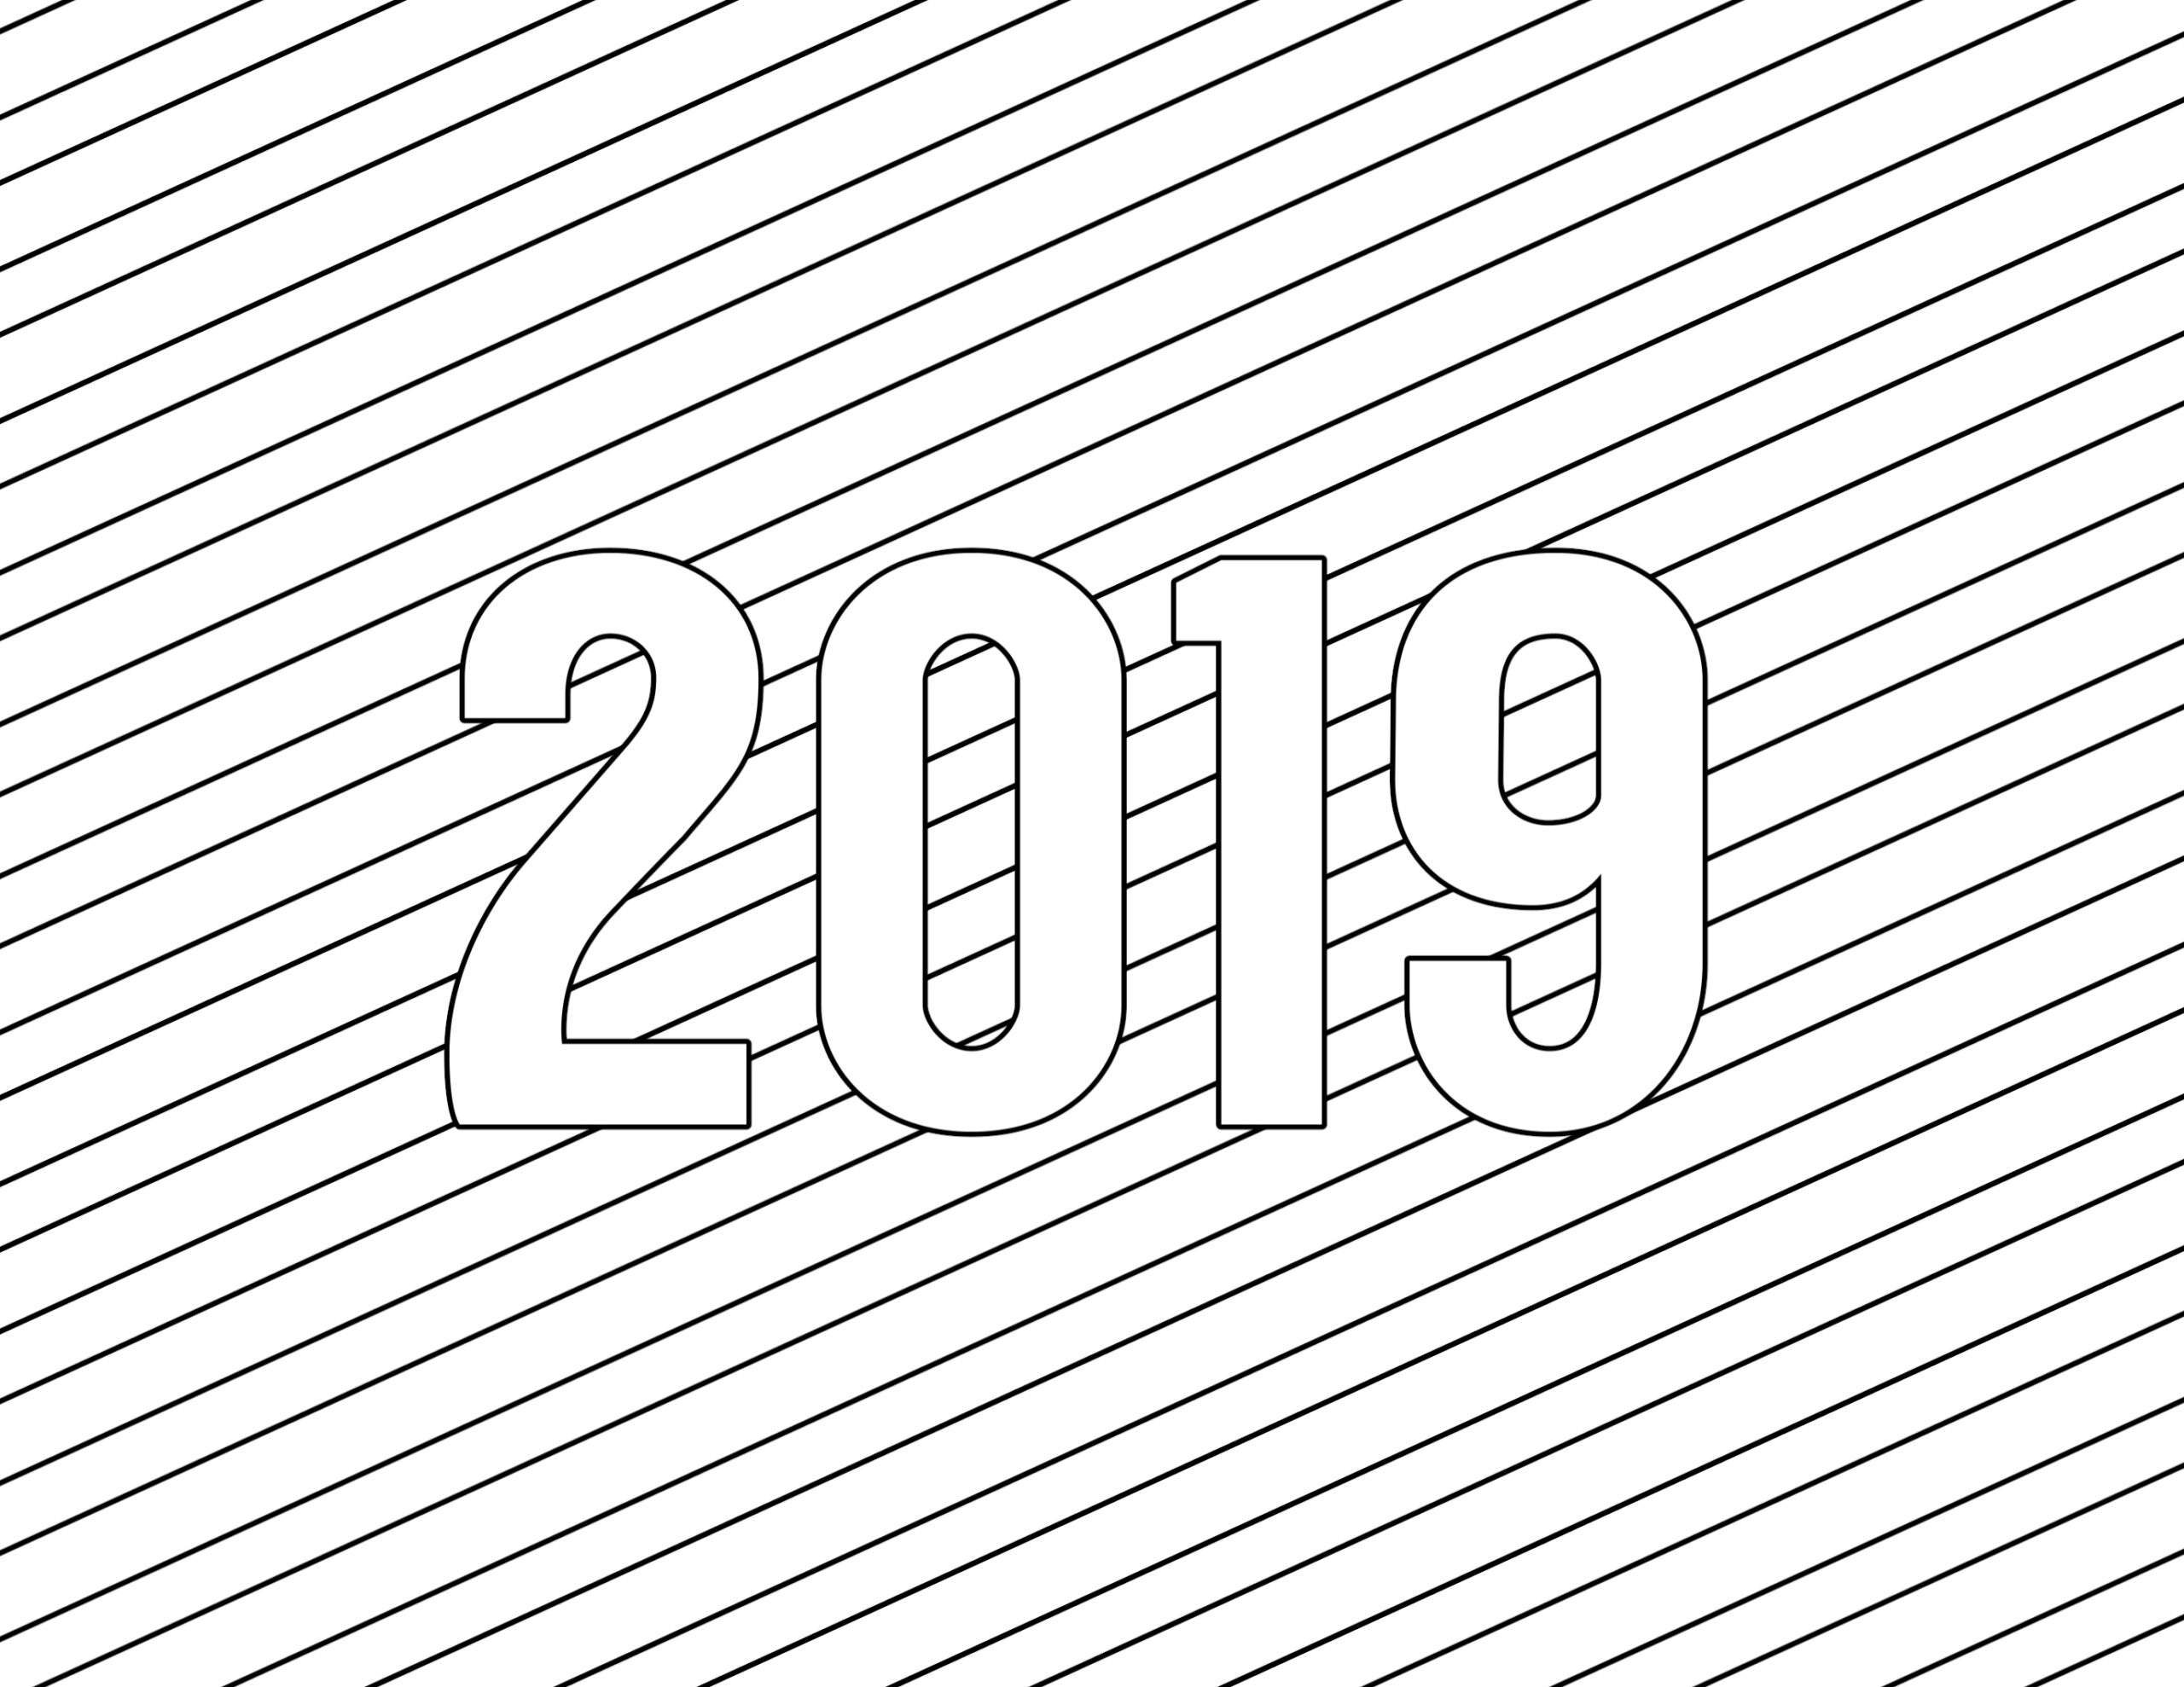 Happy New Year Coloring Pages Free Printable - Paper Trail Design - Free Printable 2018 New Years Coloring Pages